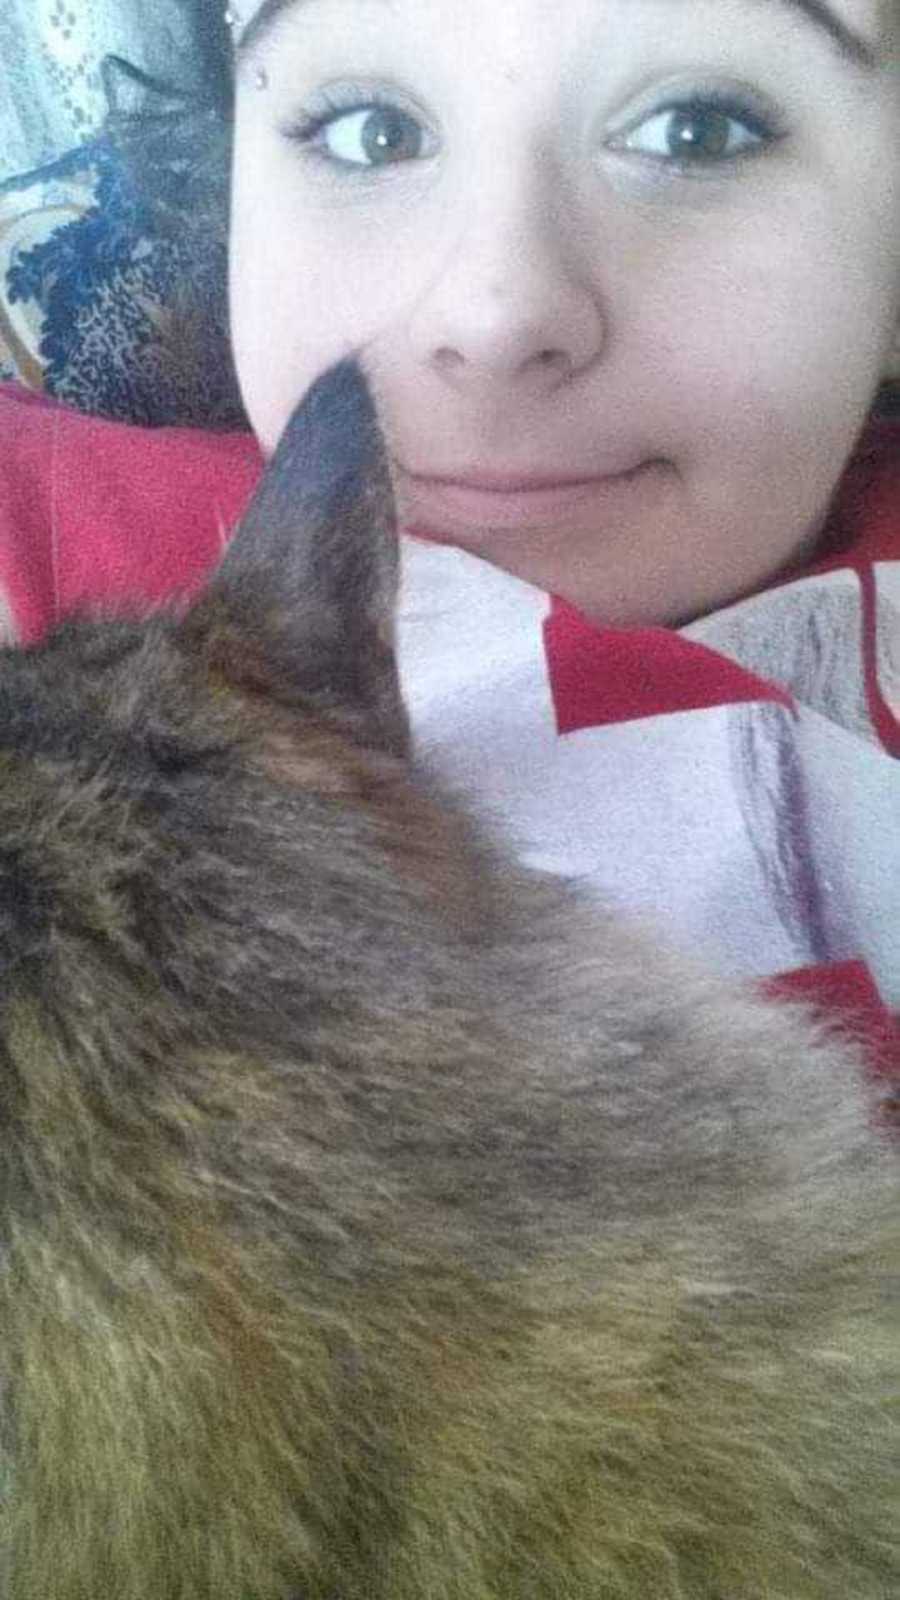 Woman who struggles with OCD smiles in selfie with cat on her lap